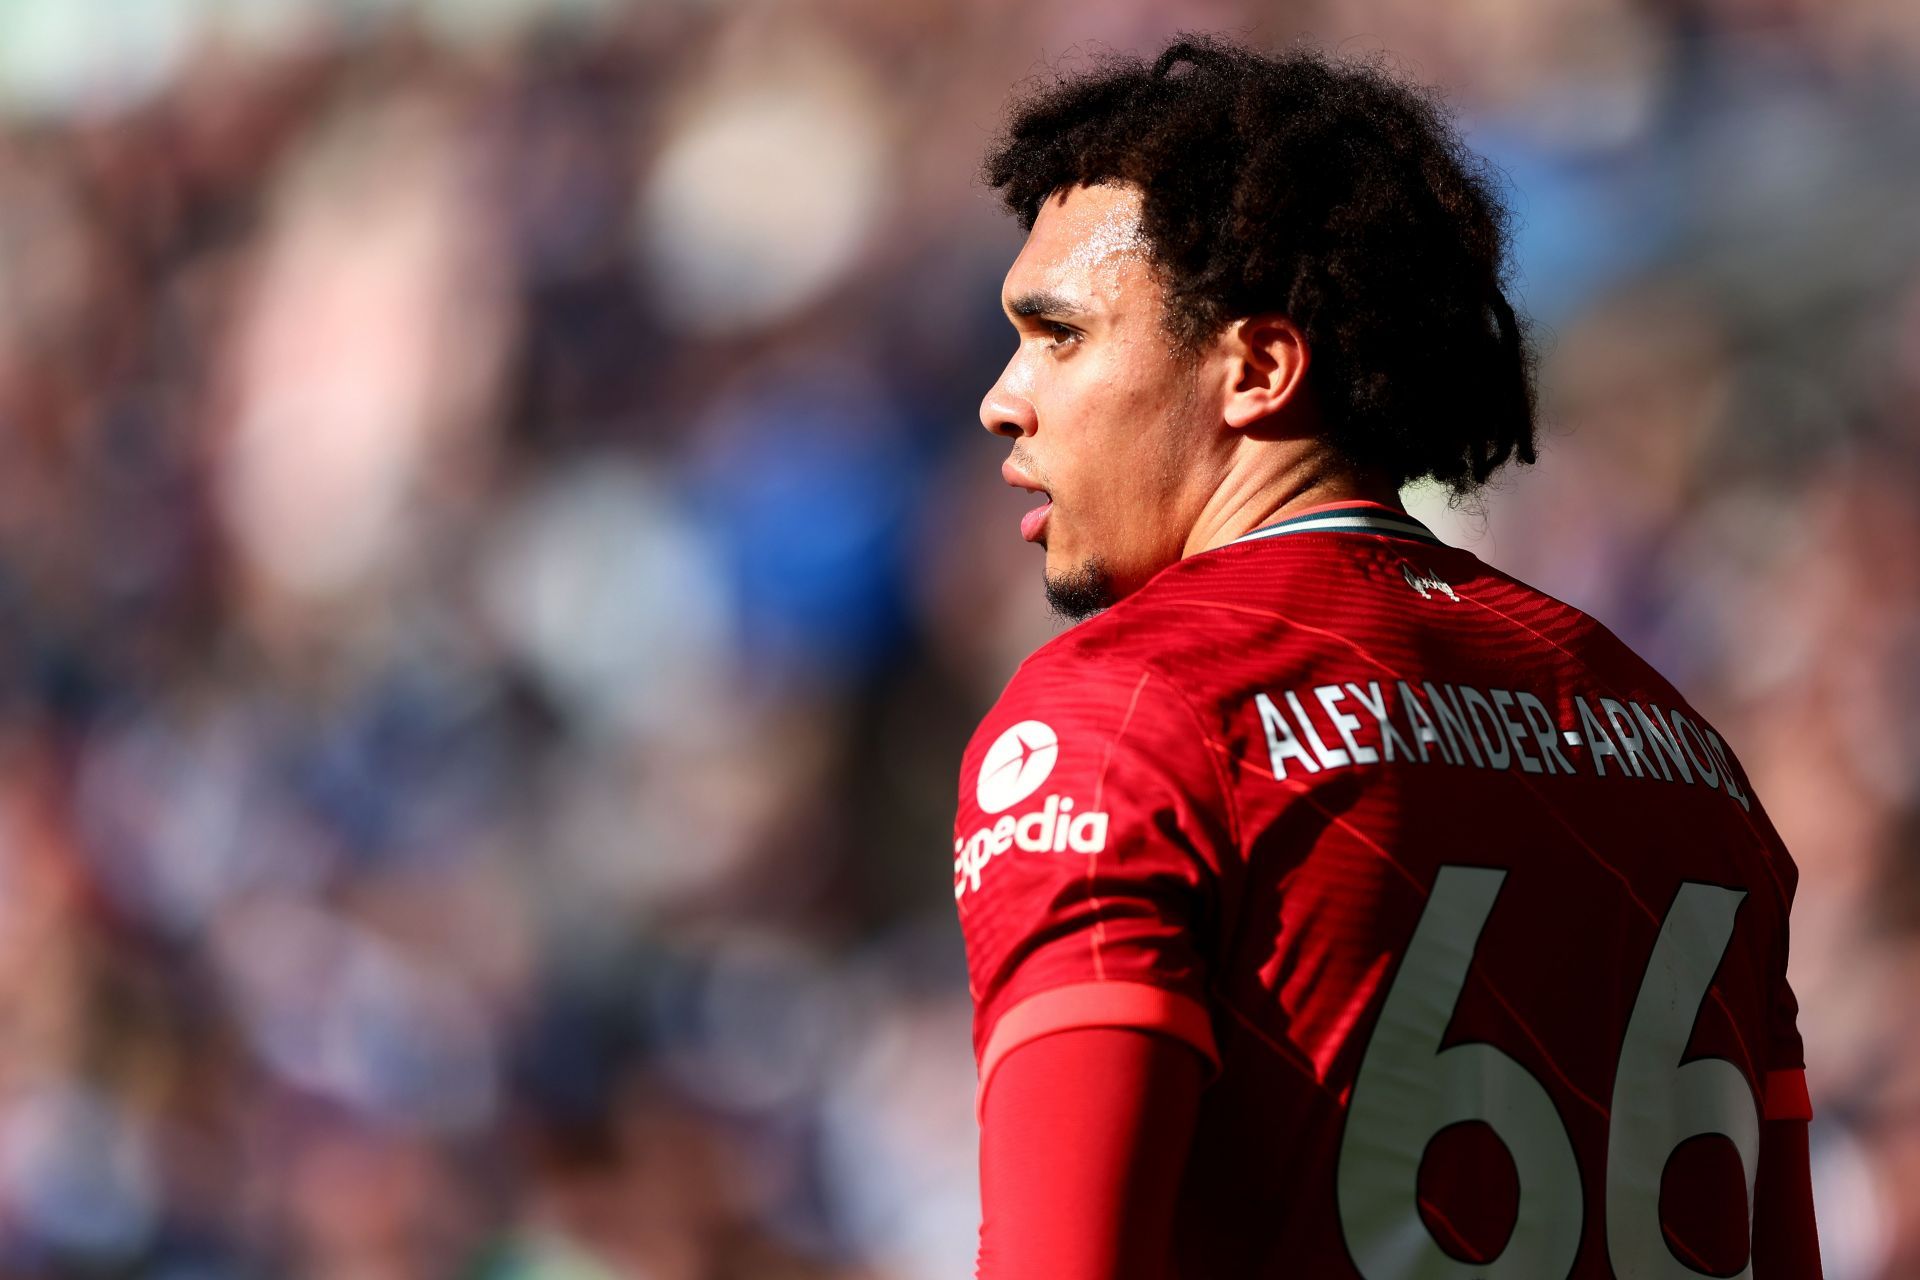 Trent Alexander-Arnold is the leading assist-provider in the Premier League